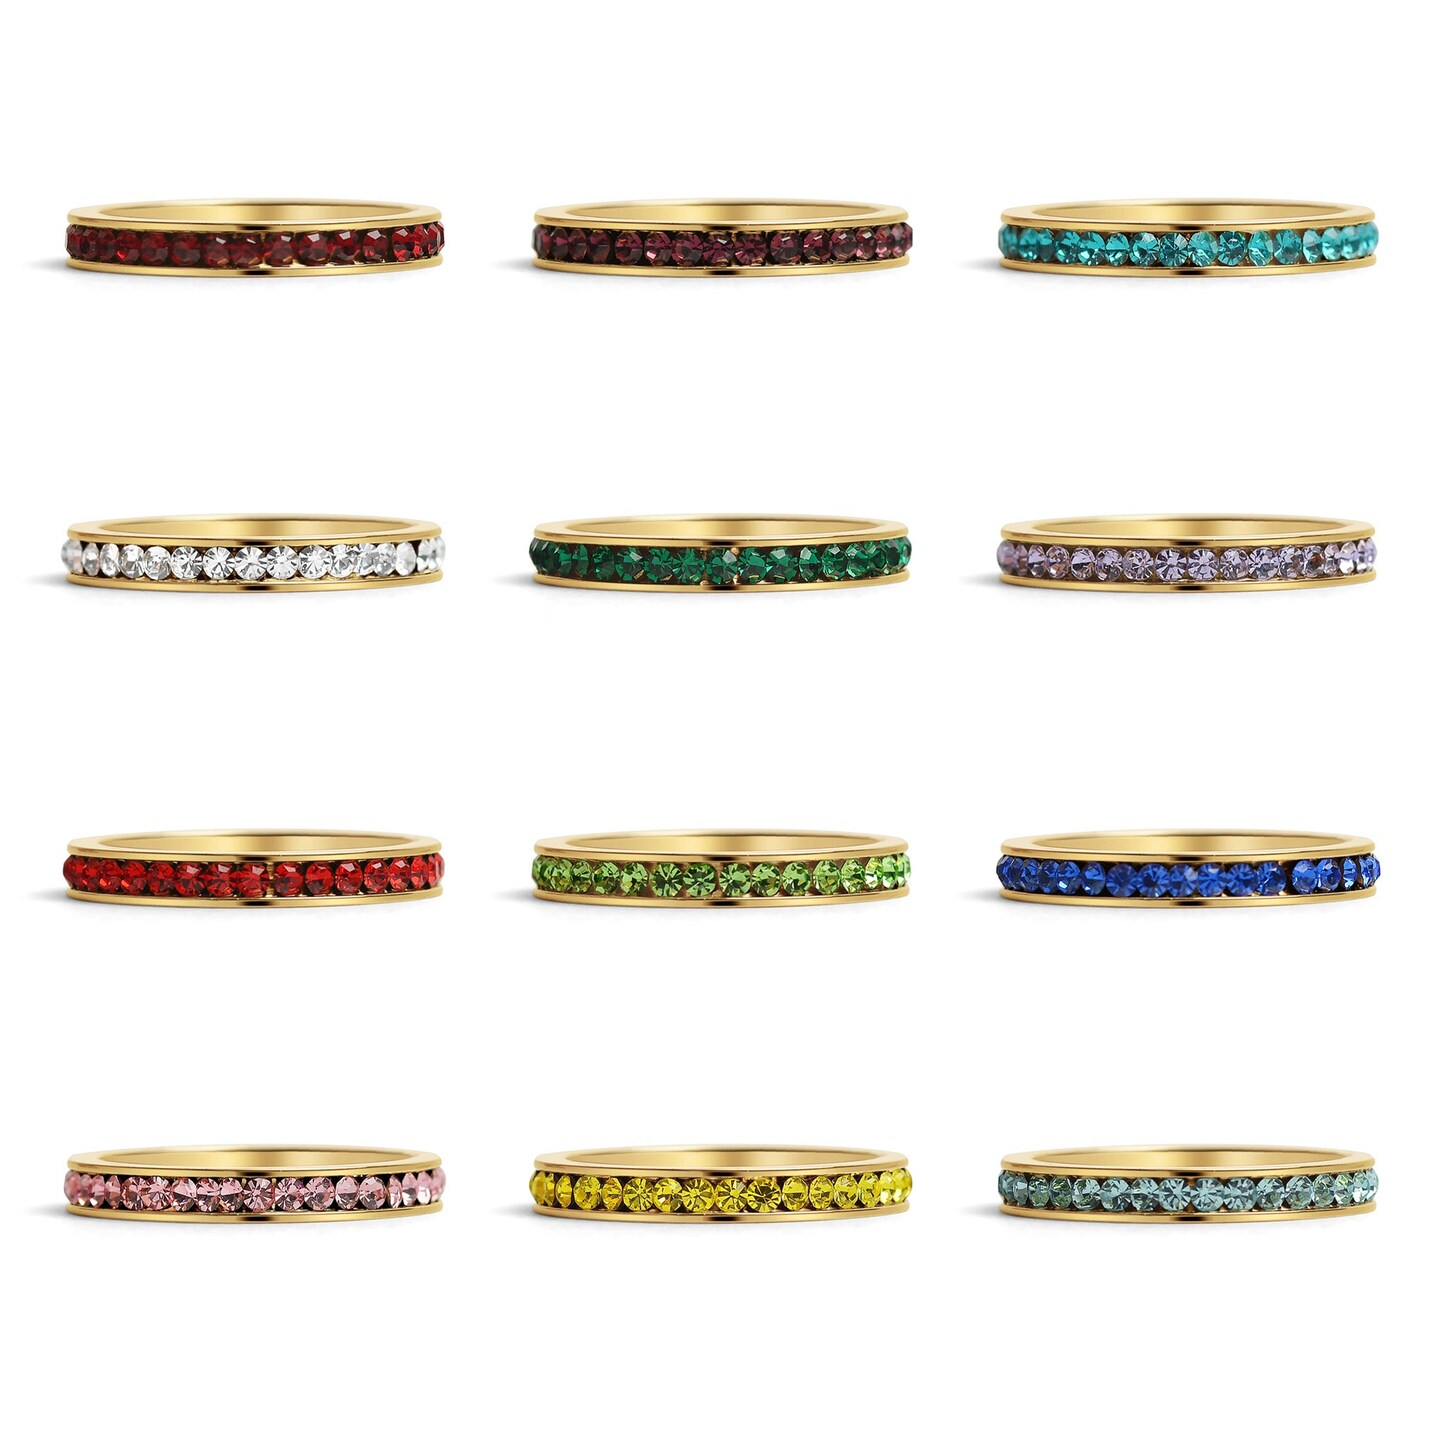 75 pc 18K Gold PVD Coated Stainless Steel Birthstone Eternity Ring Set